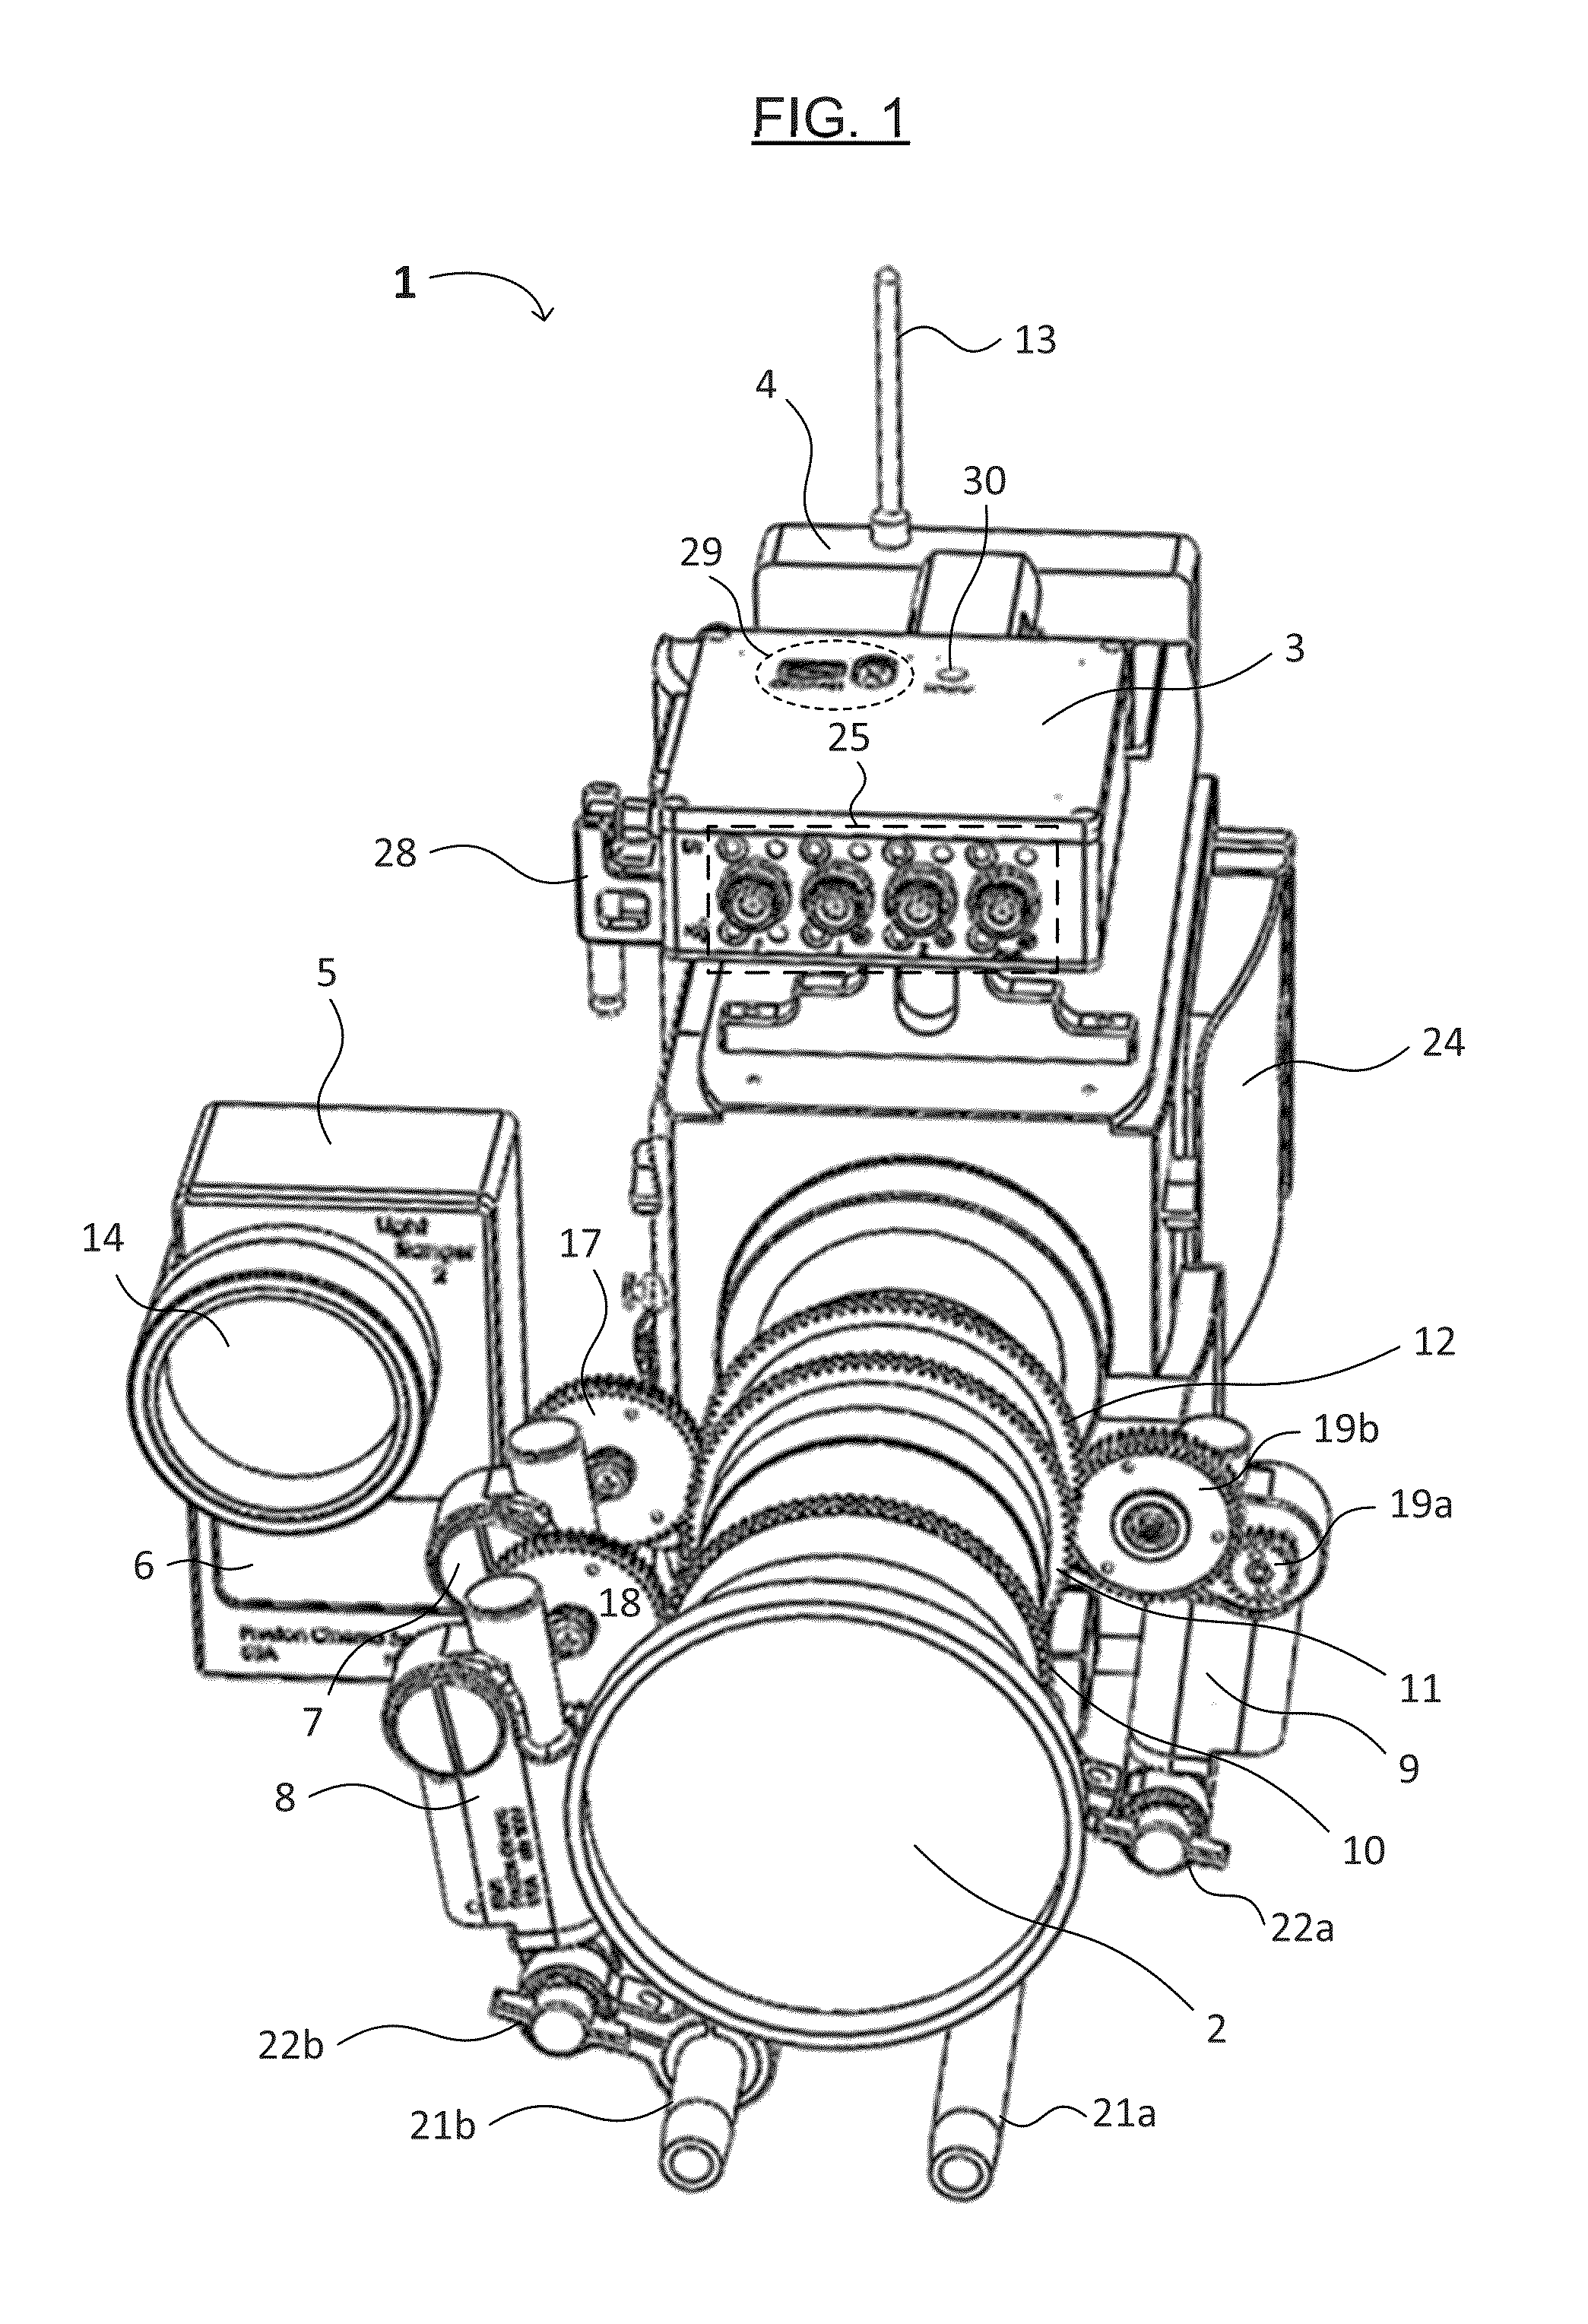 Methods, Apparatuses, Systems and Software for Focusing a Camera